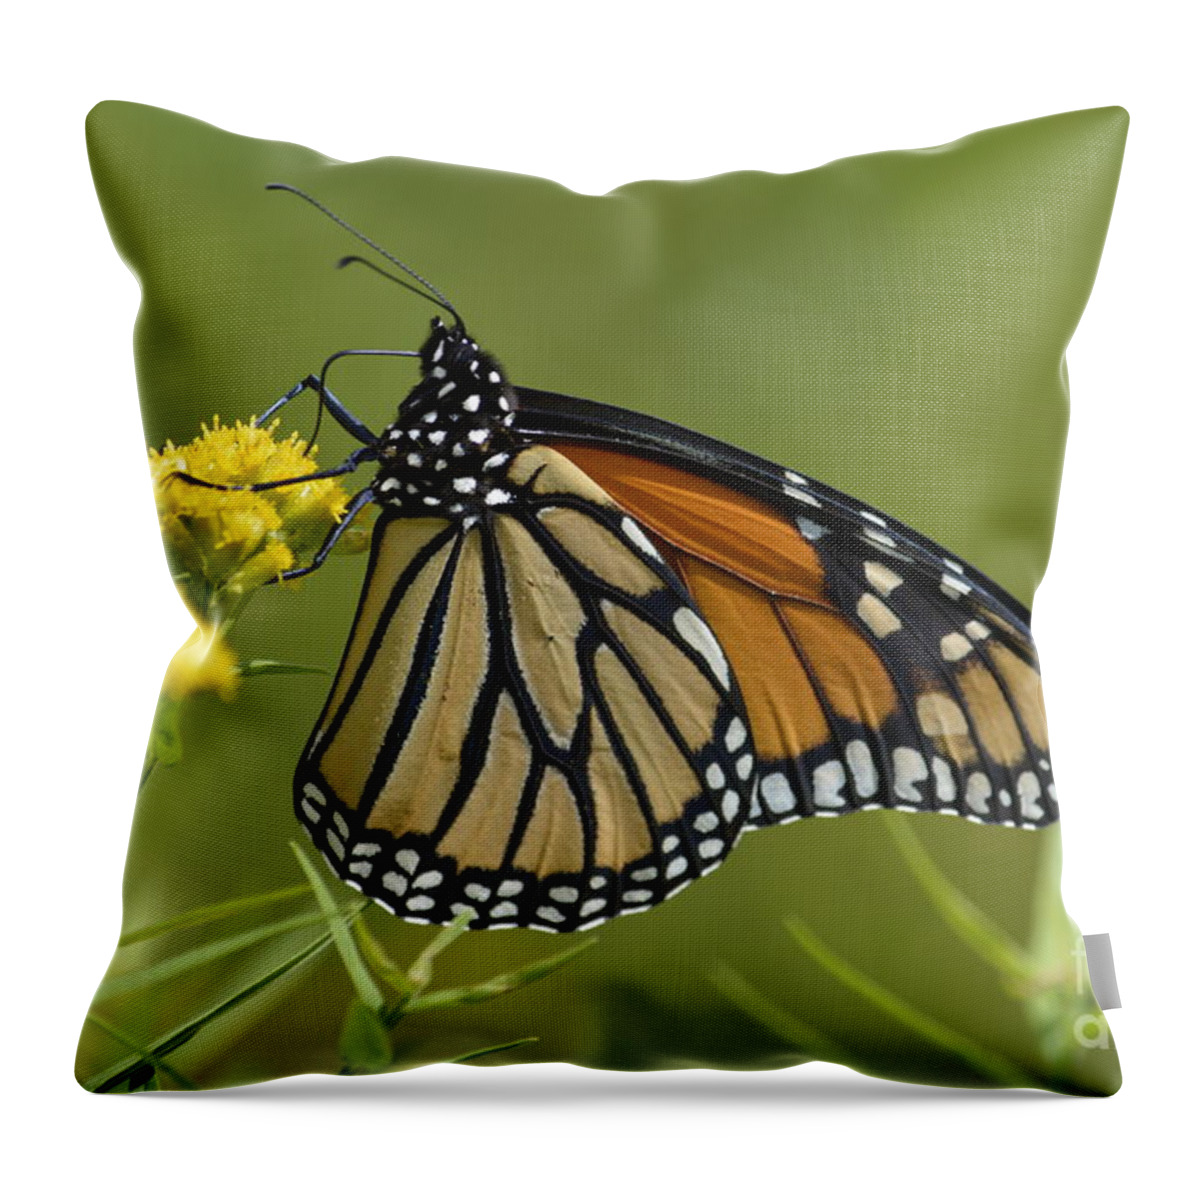 Wildflowers Throw Pillow featuring the photograph Monarch 2014 by Randy Bodkins